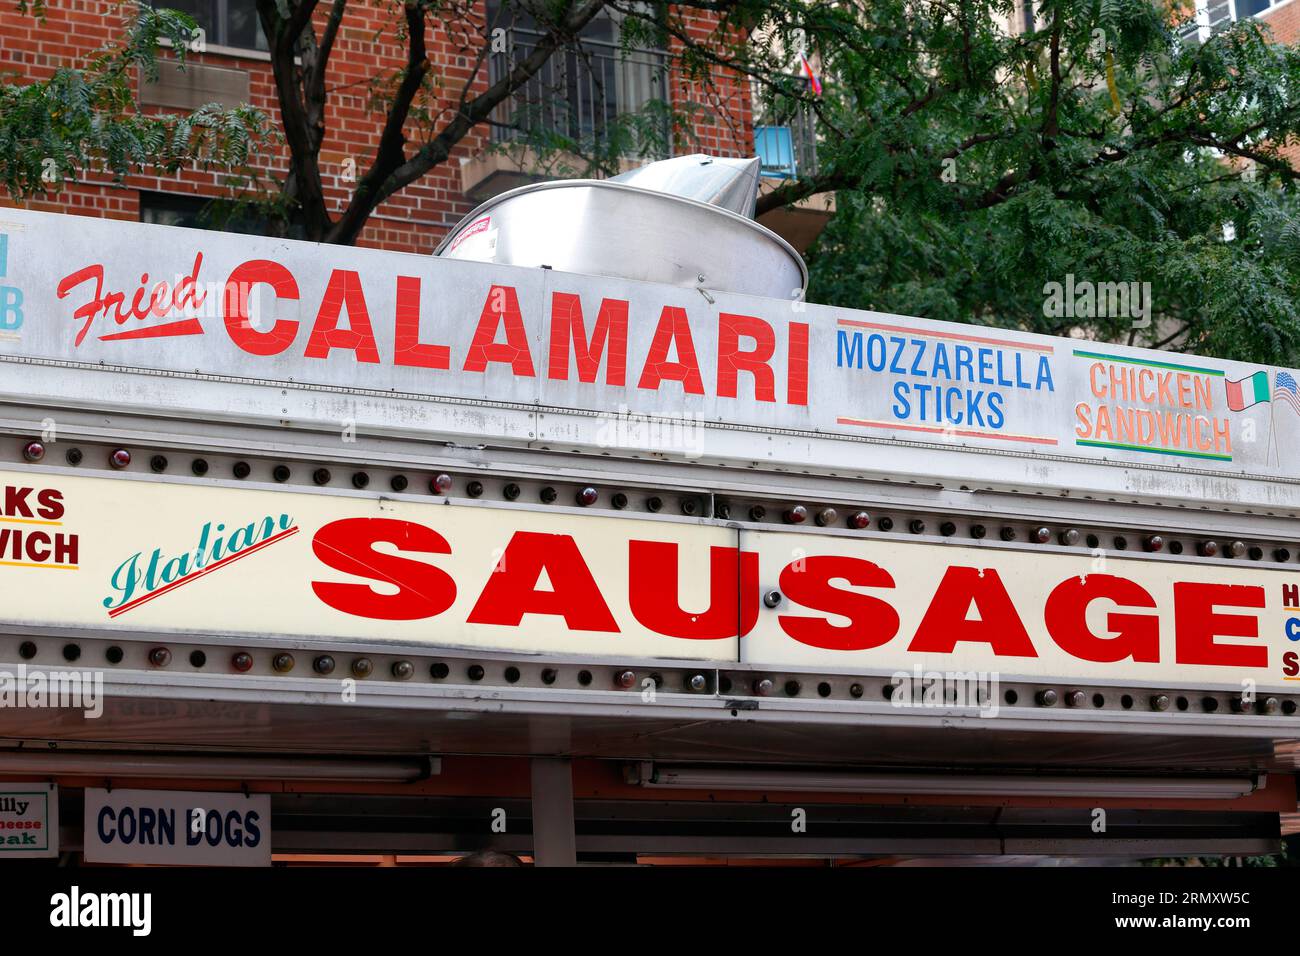 Signage for Fried Calamari and Italian Sausage at an Italian American food cart at a food festival street fair in New York City. Stock Photo